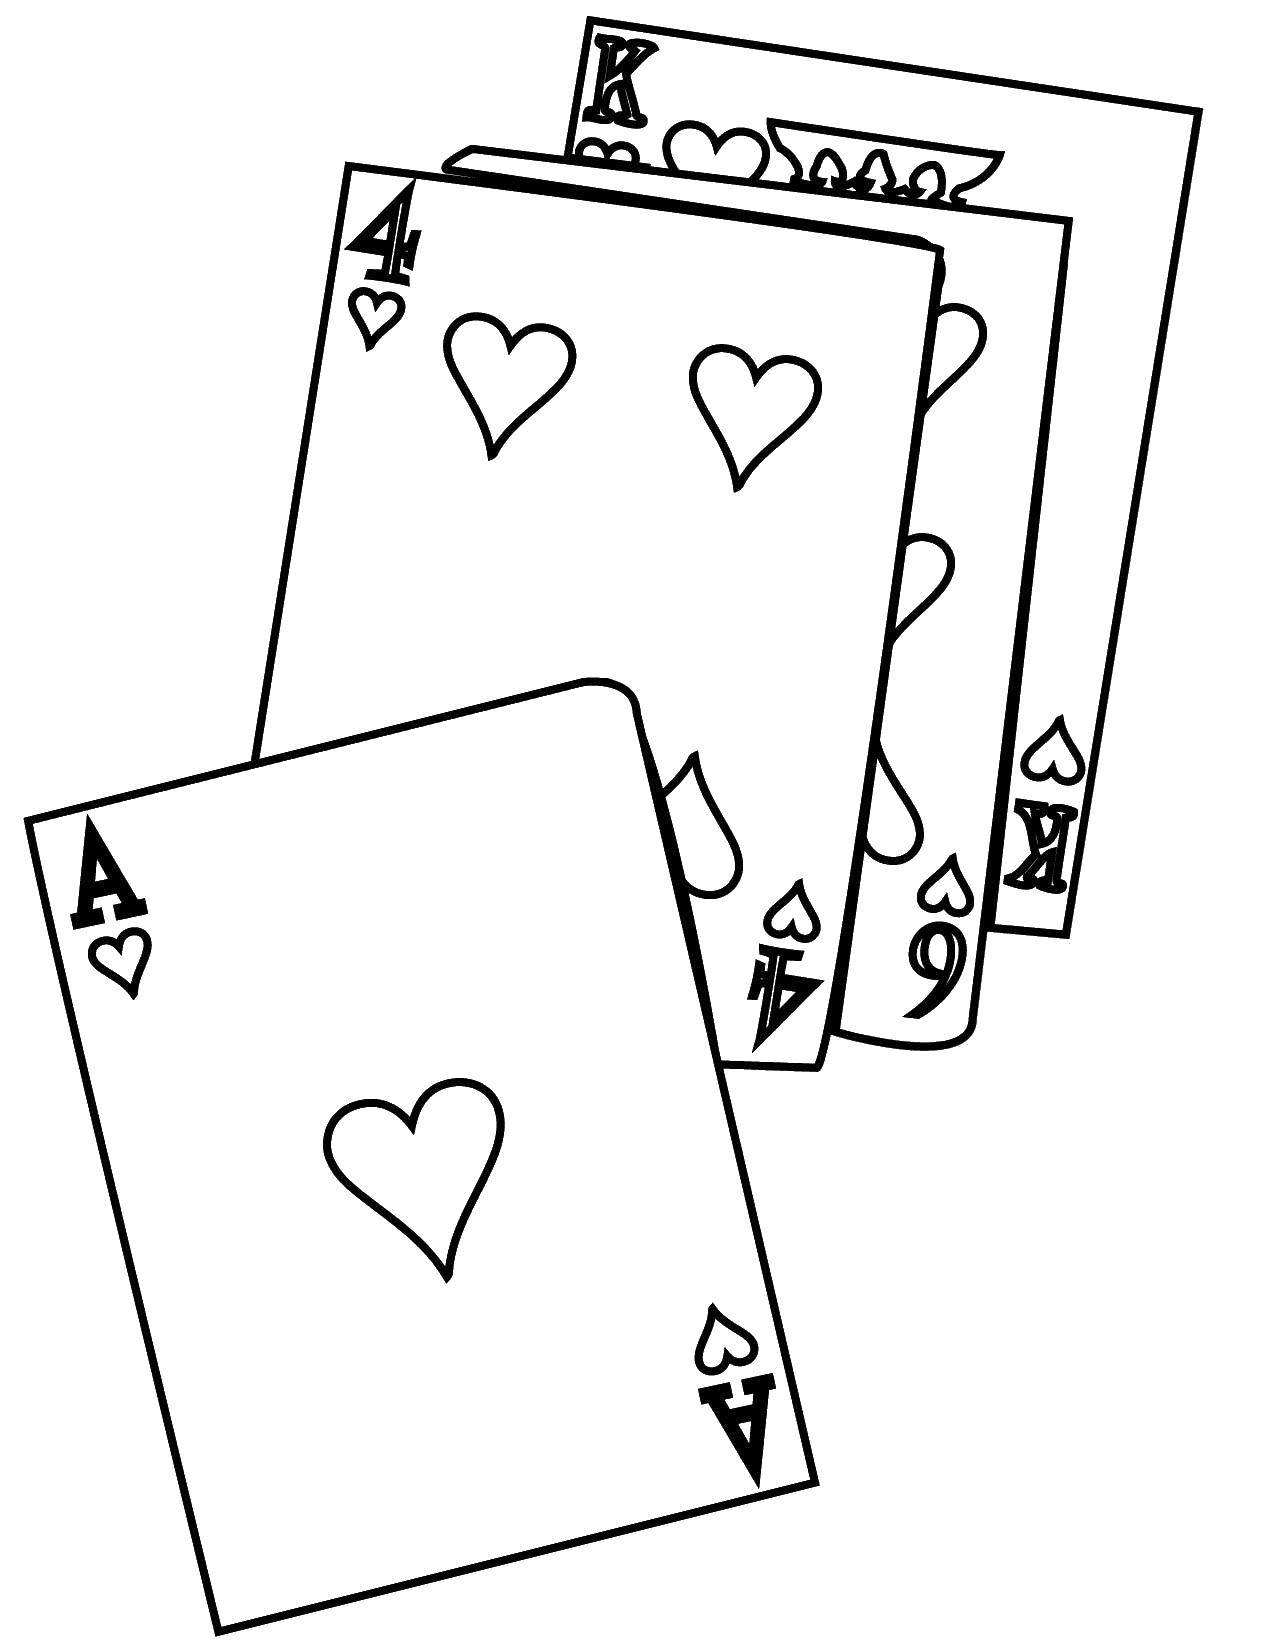 Coloring Card. Category games. Tags:  king, ACE, hearts.